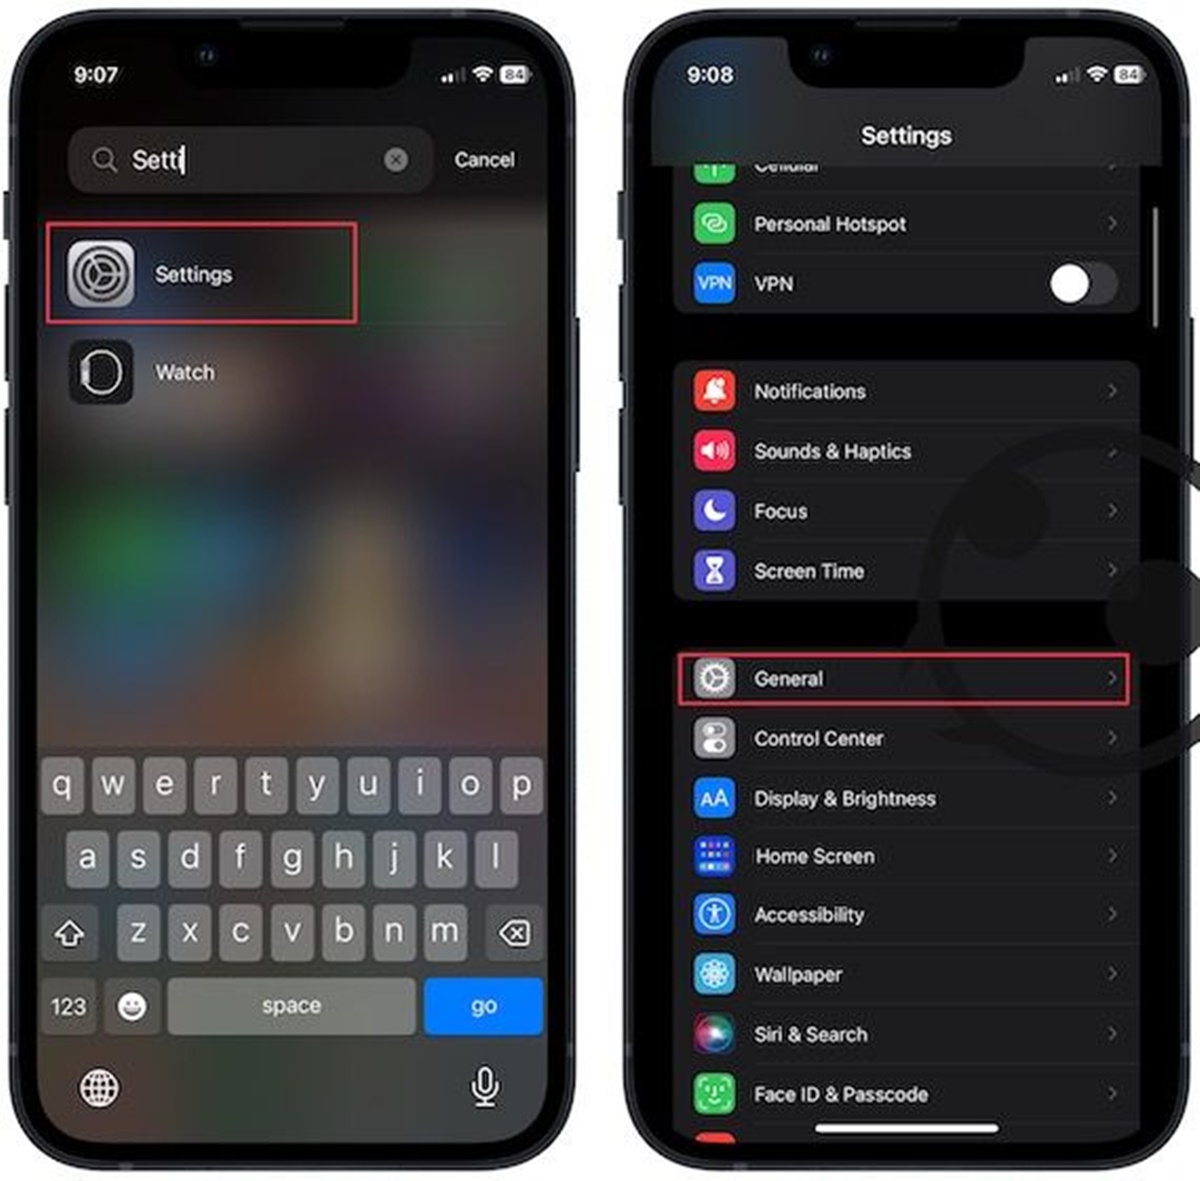 How To Clear Keyboard History On iPhone